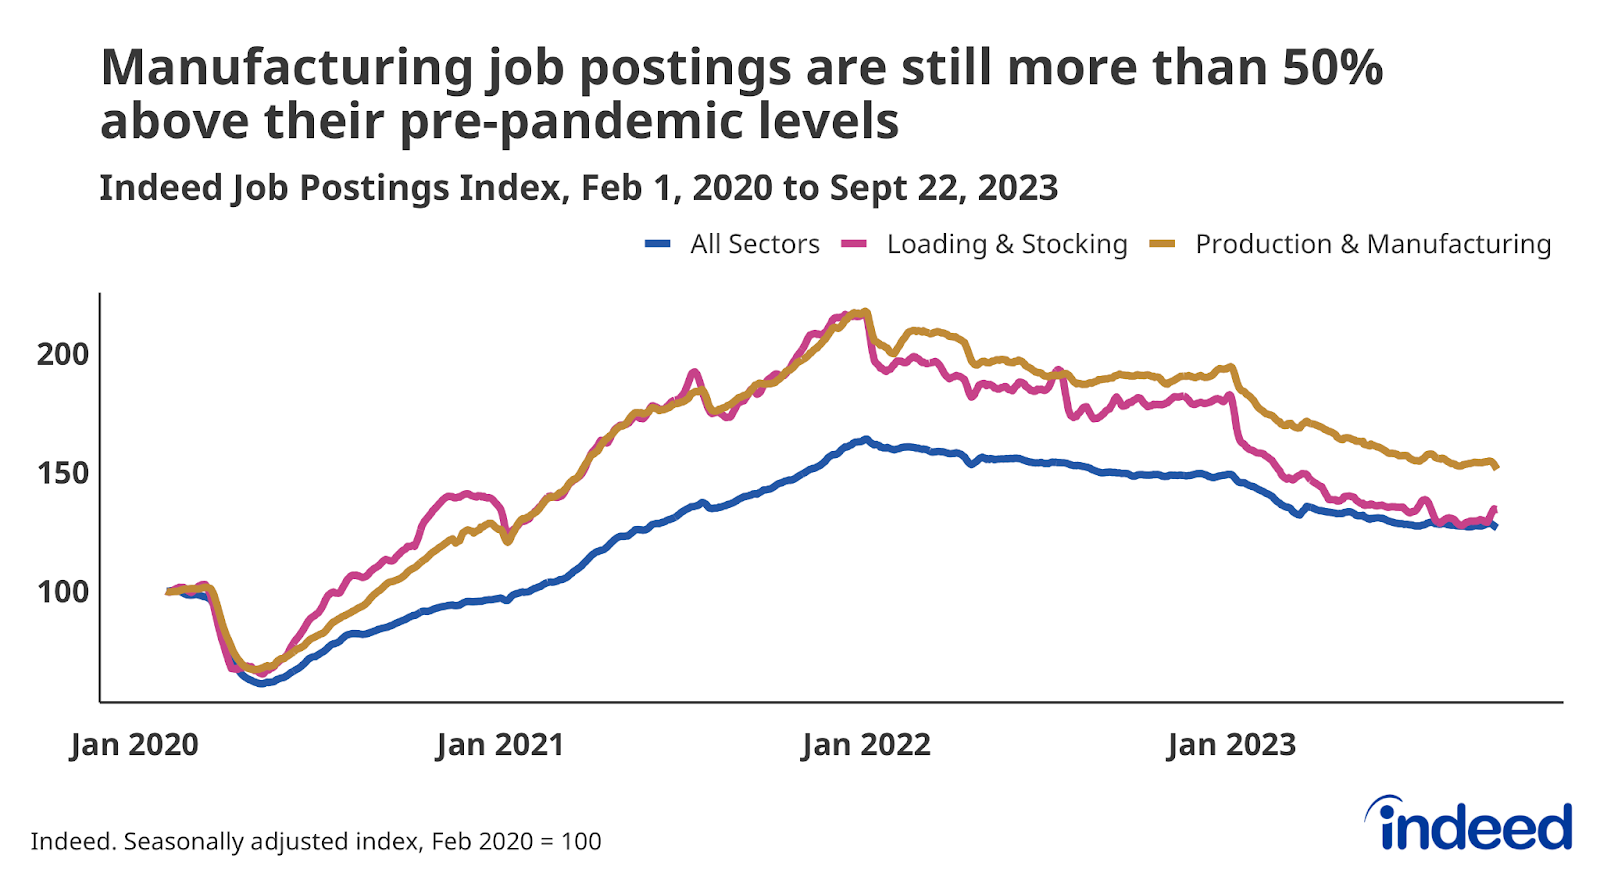 A line graph titled “Manufacturing job postings are still more than 50% above their pre-pandemic levels” shows the Indeed Job Posting Index for jobs across all sectors, loading & stocking, and production & manufacturing. Production & manufacturing jobs continue to outpace the overall index despite declining more than 20% in the last year.